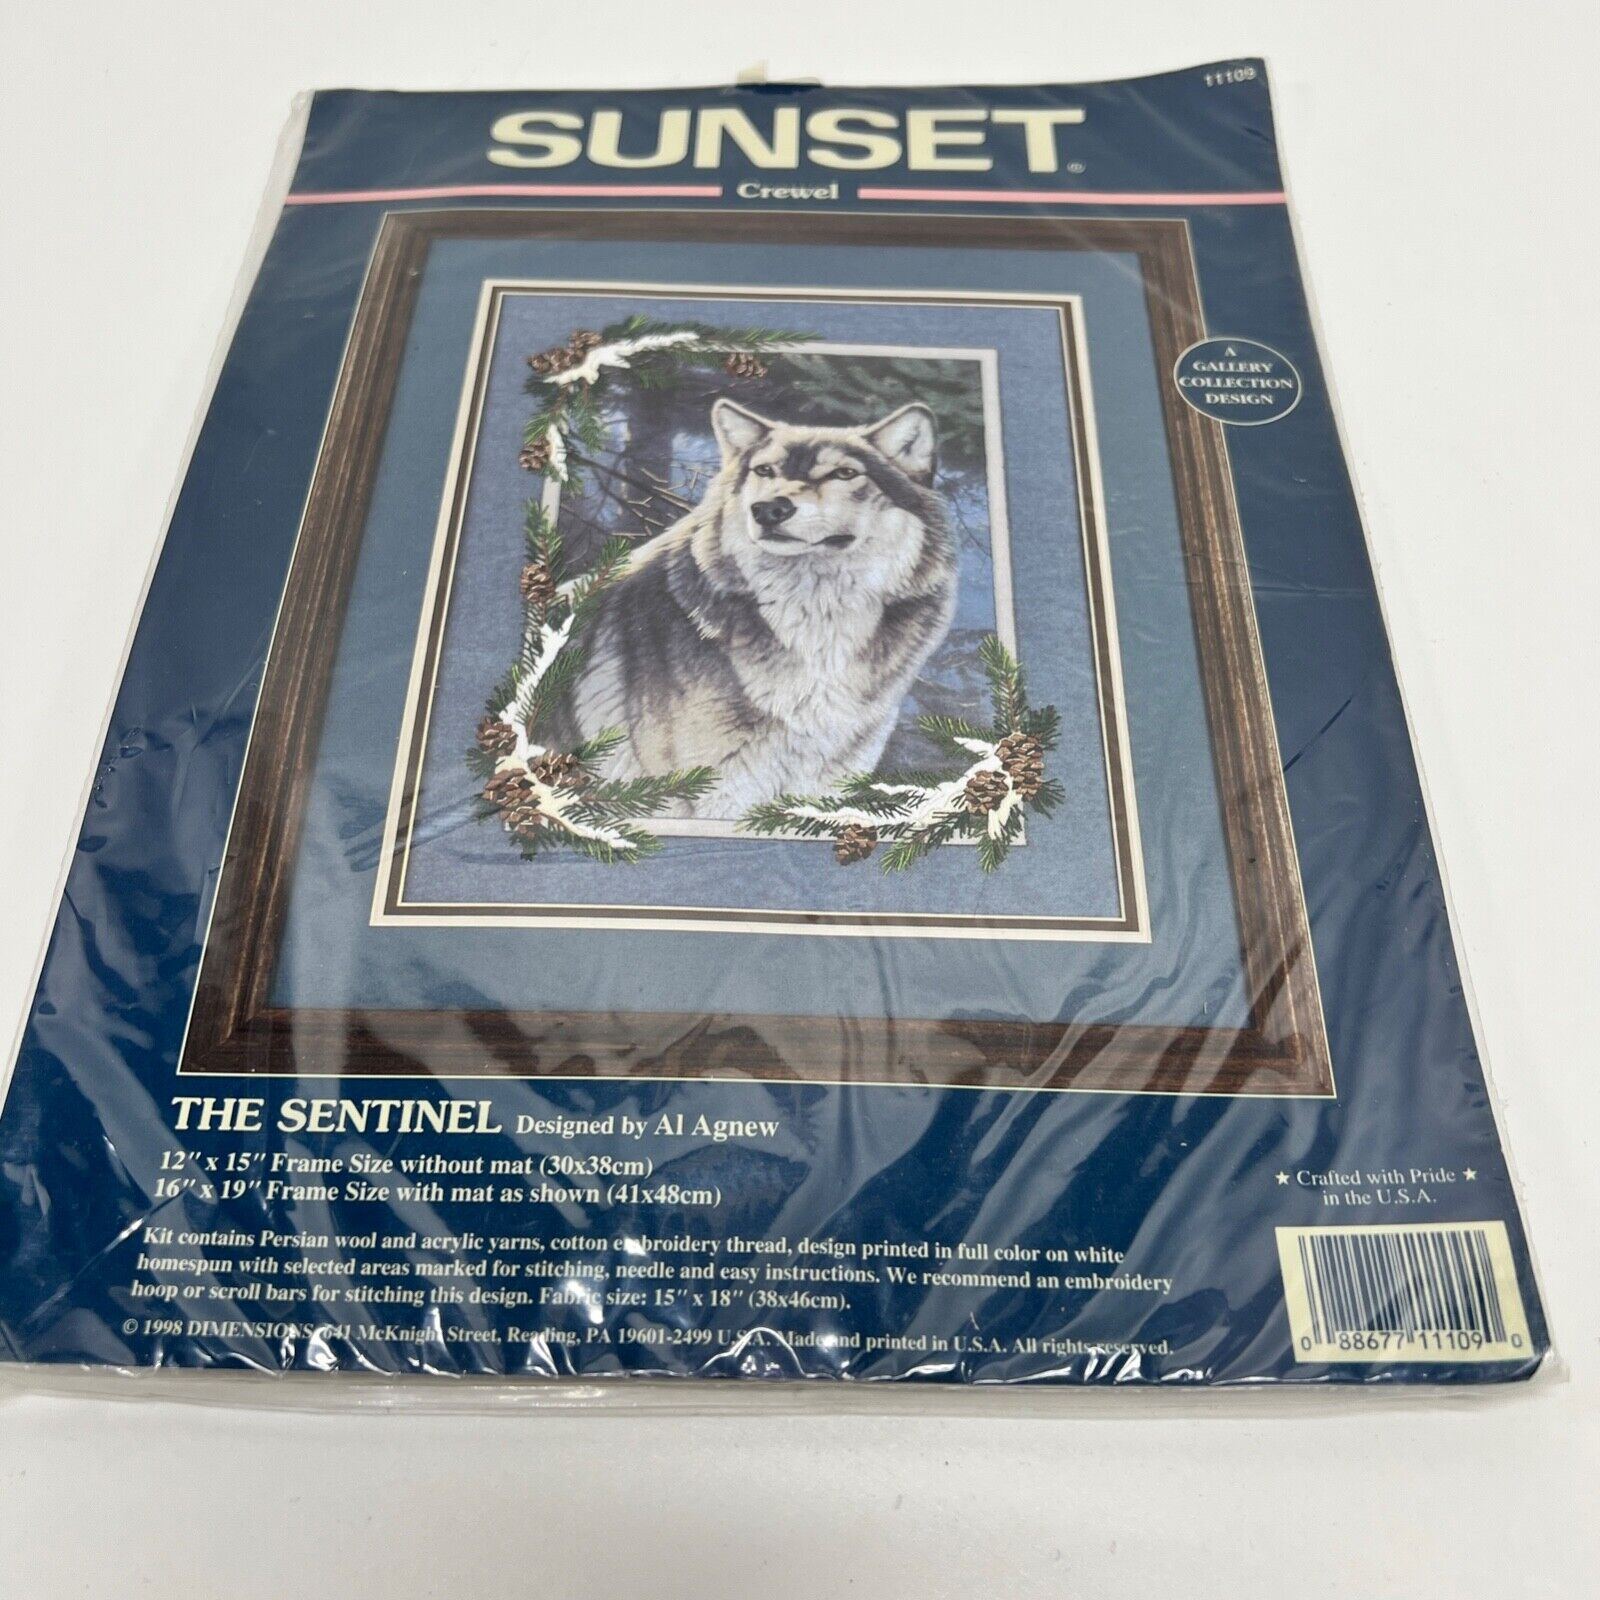 Sunset The Sentinel Wolf Crewel Kit 1998 No. 11109 by Al Agnew